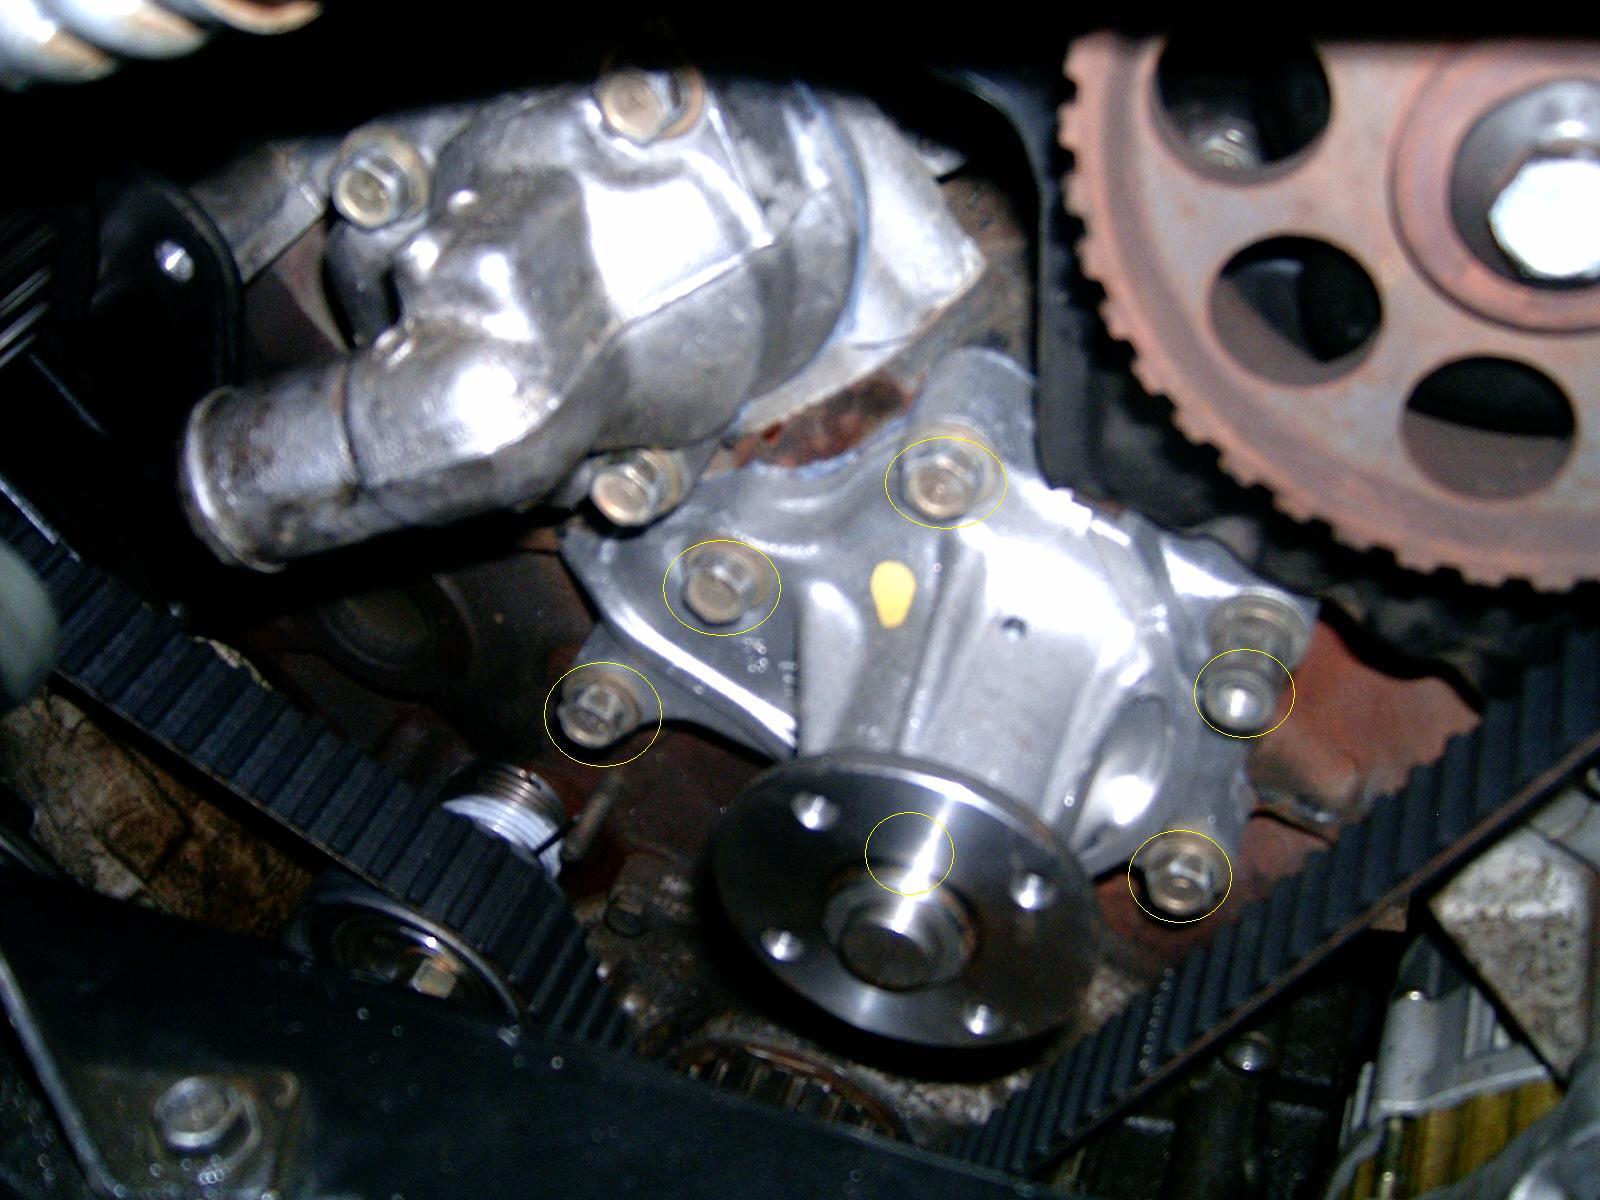 2000 Nissan maxima water pump removal #3